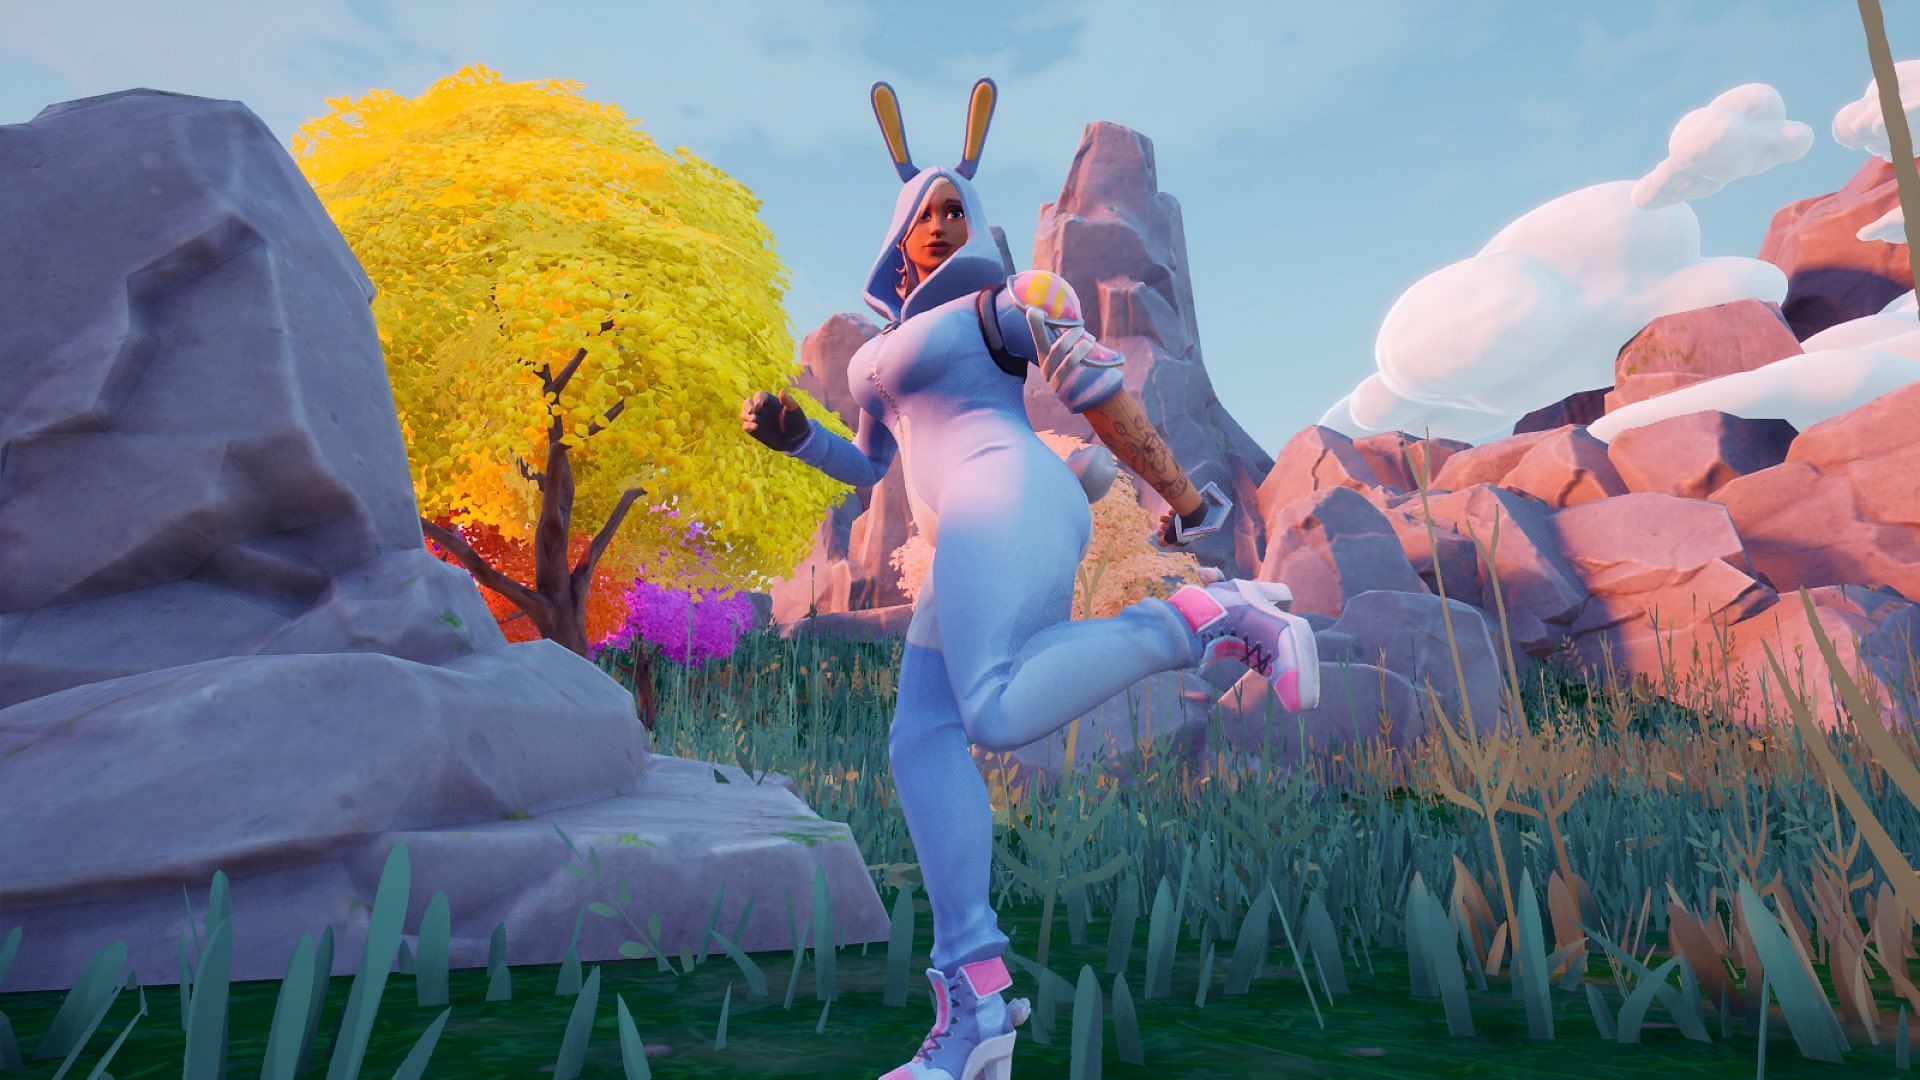 Miss Bunny Penny Fortnite Outfit has finally been added to the Item Shop (Image via Twitter/CuddlyThreat)